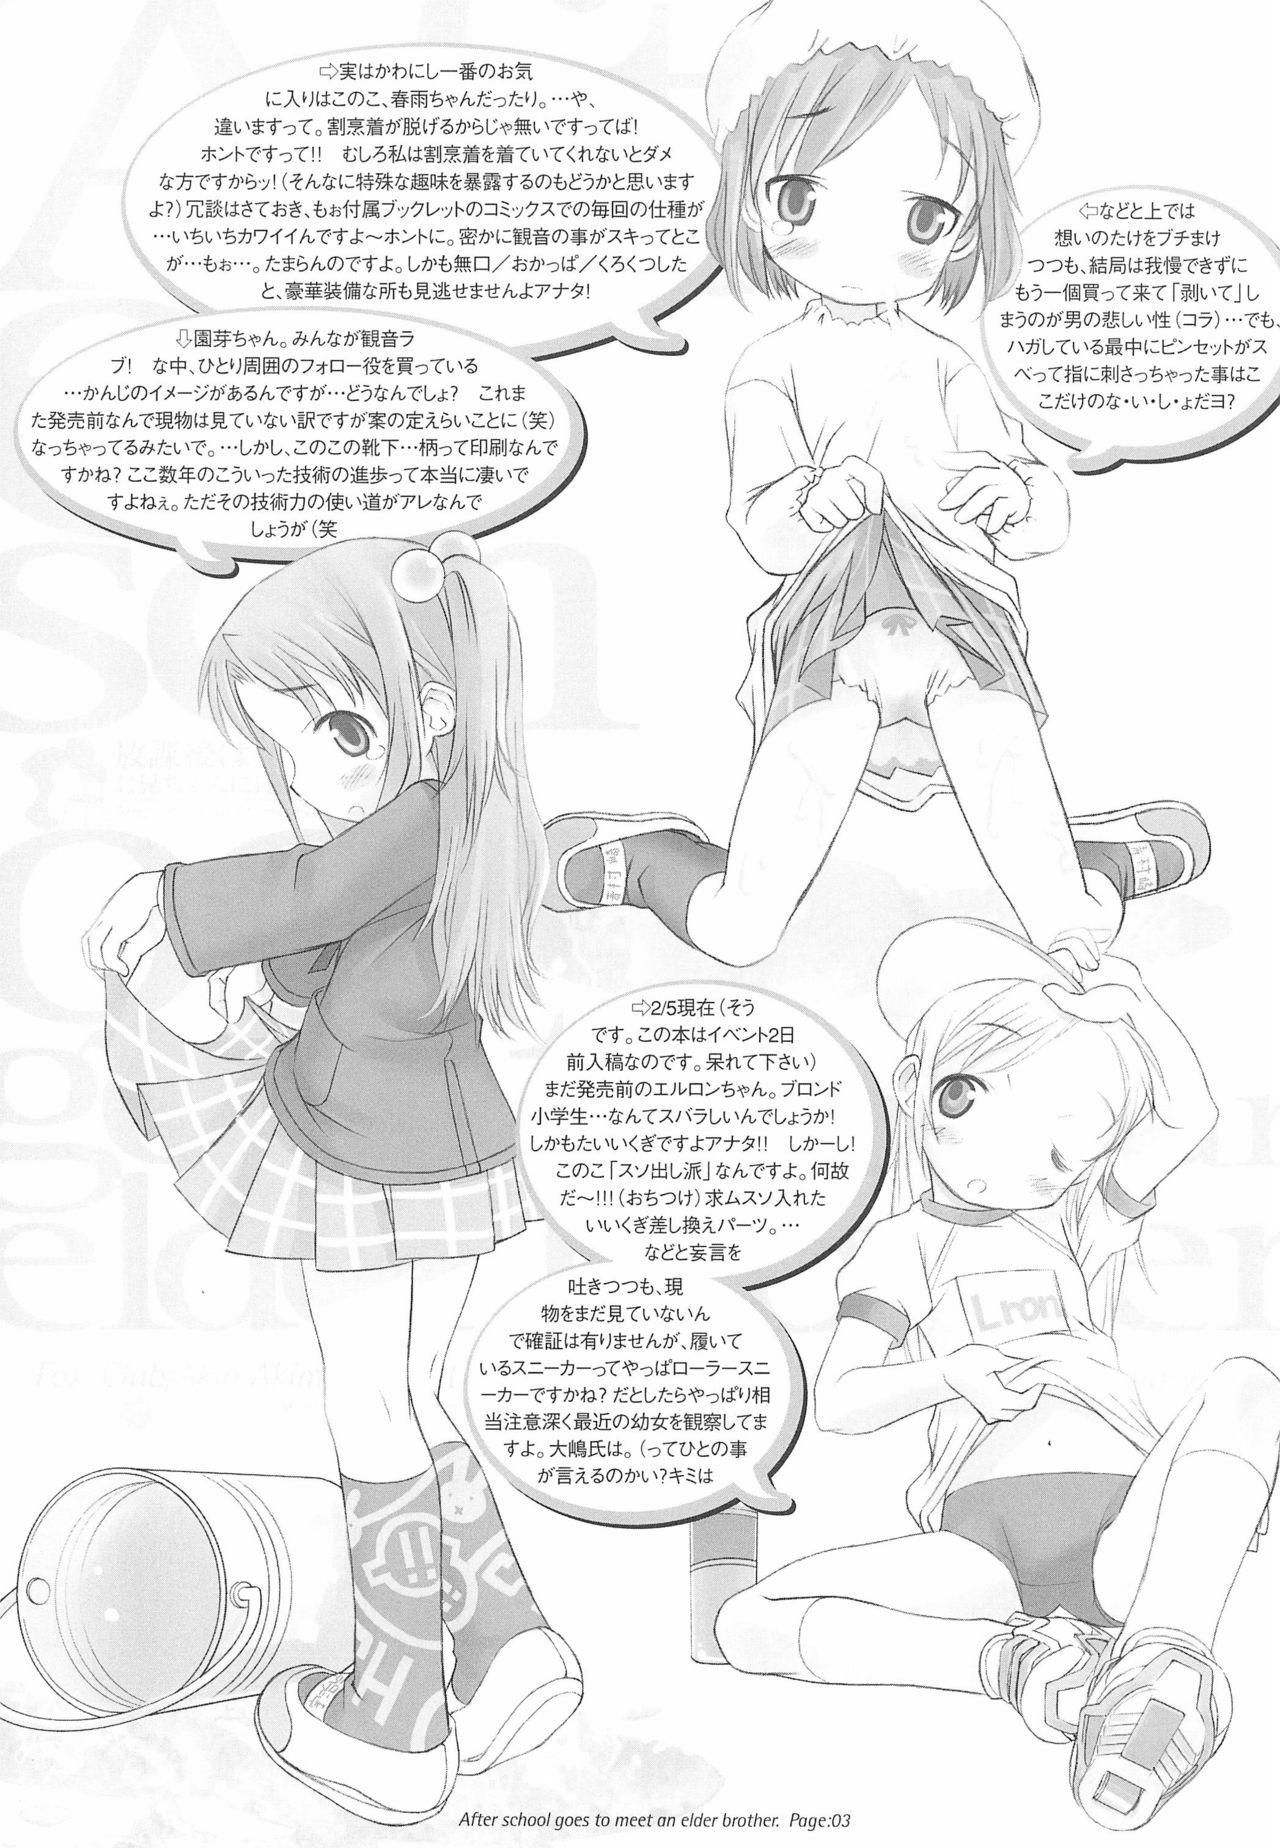 Mexico After School Goes To Meet An Elder Brother - Shuukan watashi no onii-chan | weekly dearest my brother Penetration - Page 3